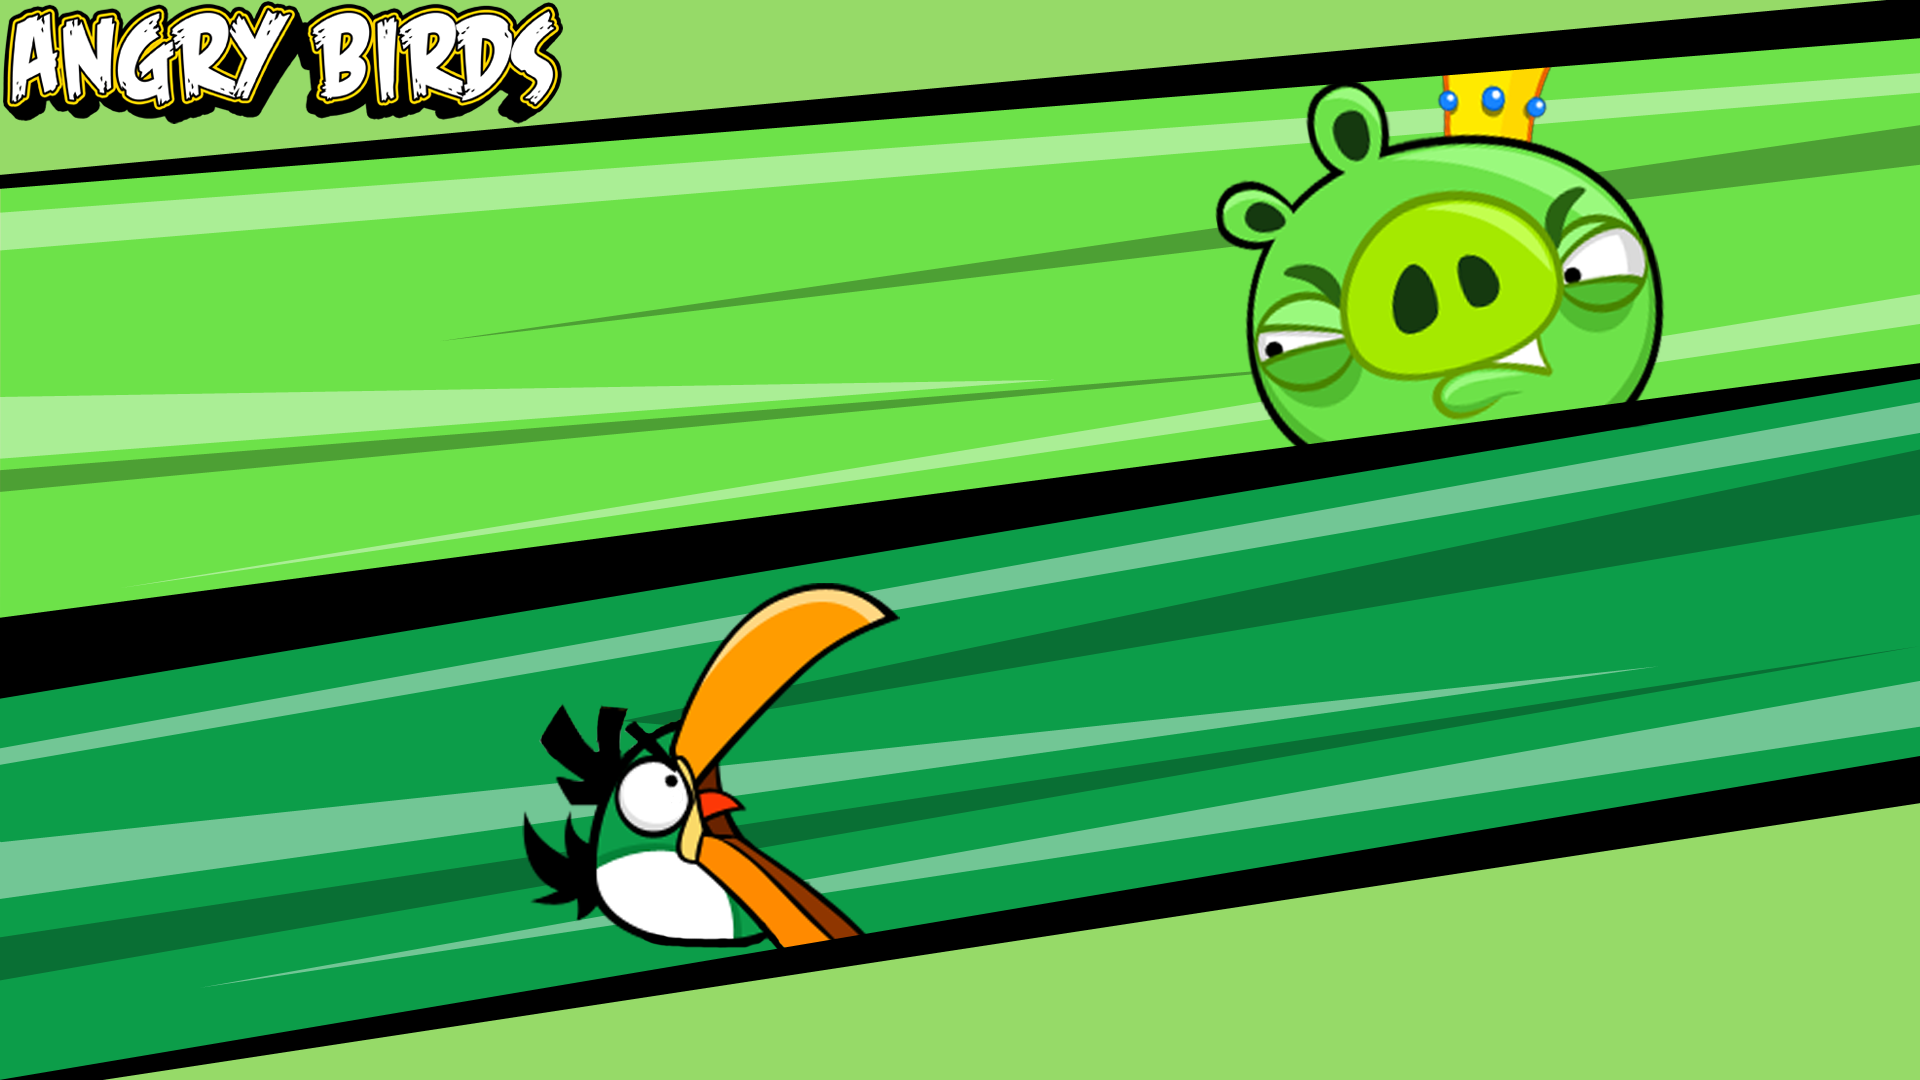 General 1920x1080 Angry Birds artwork green background green video games video game characters